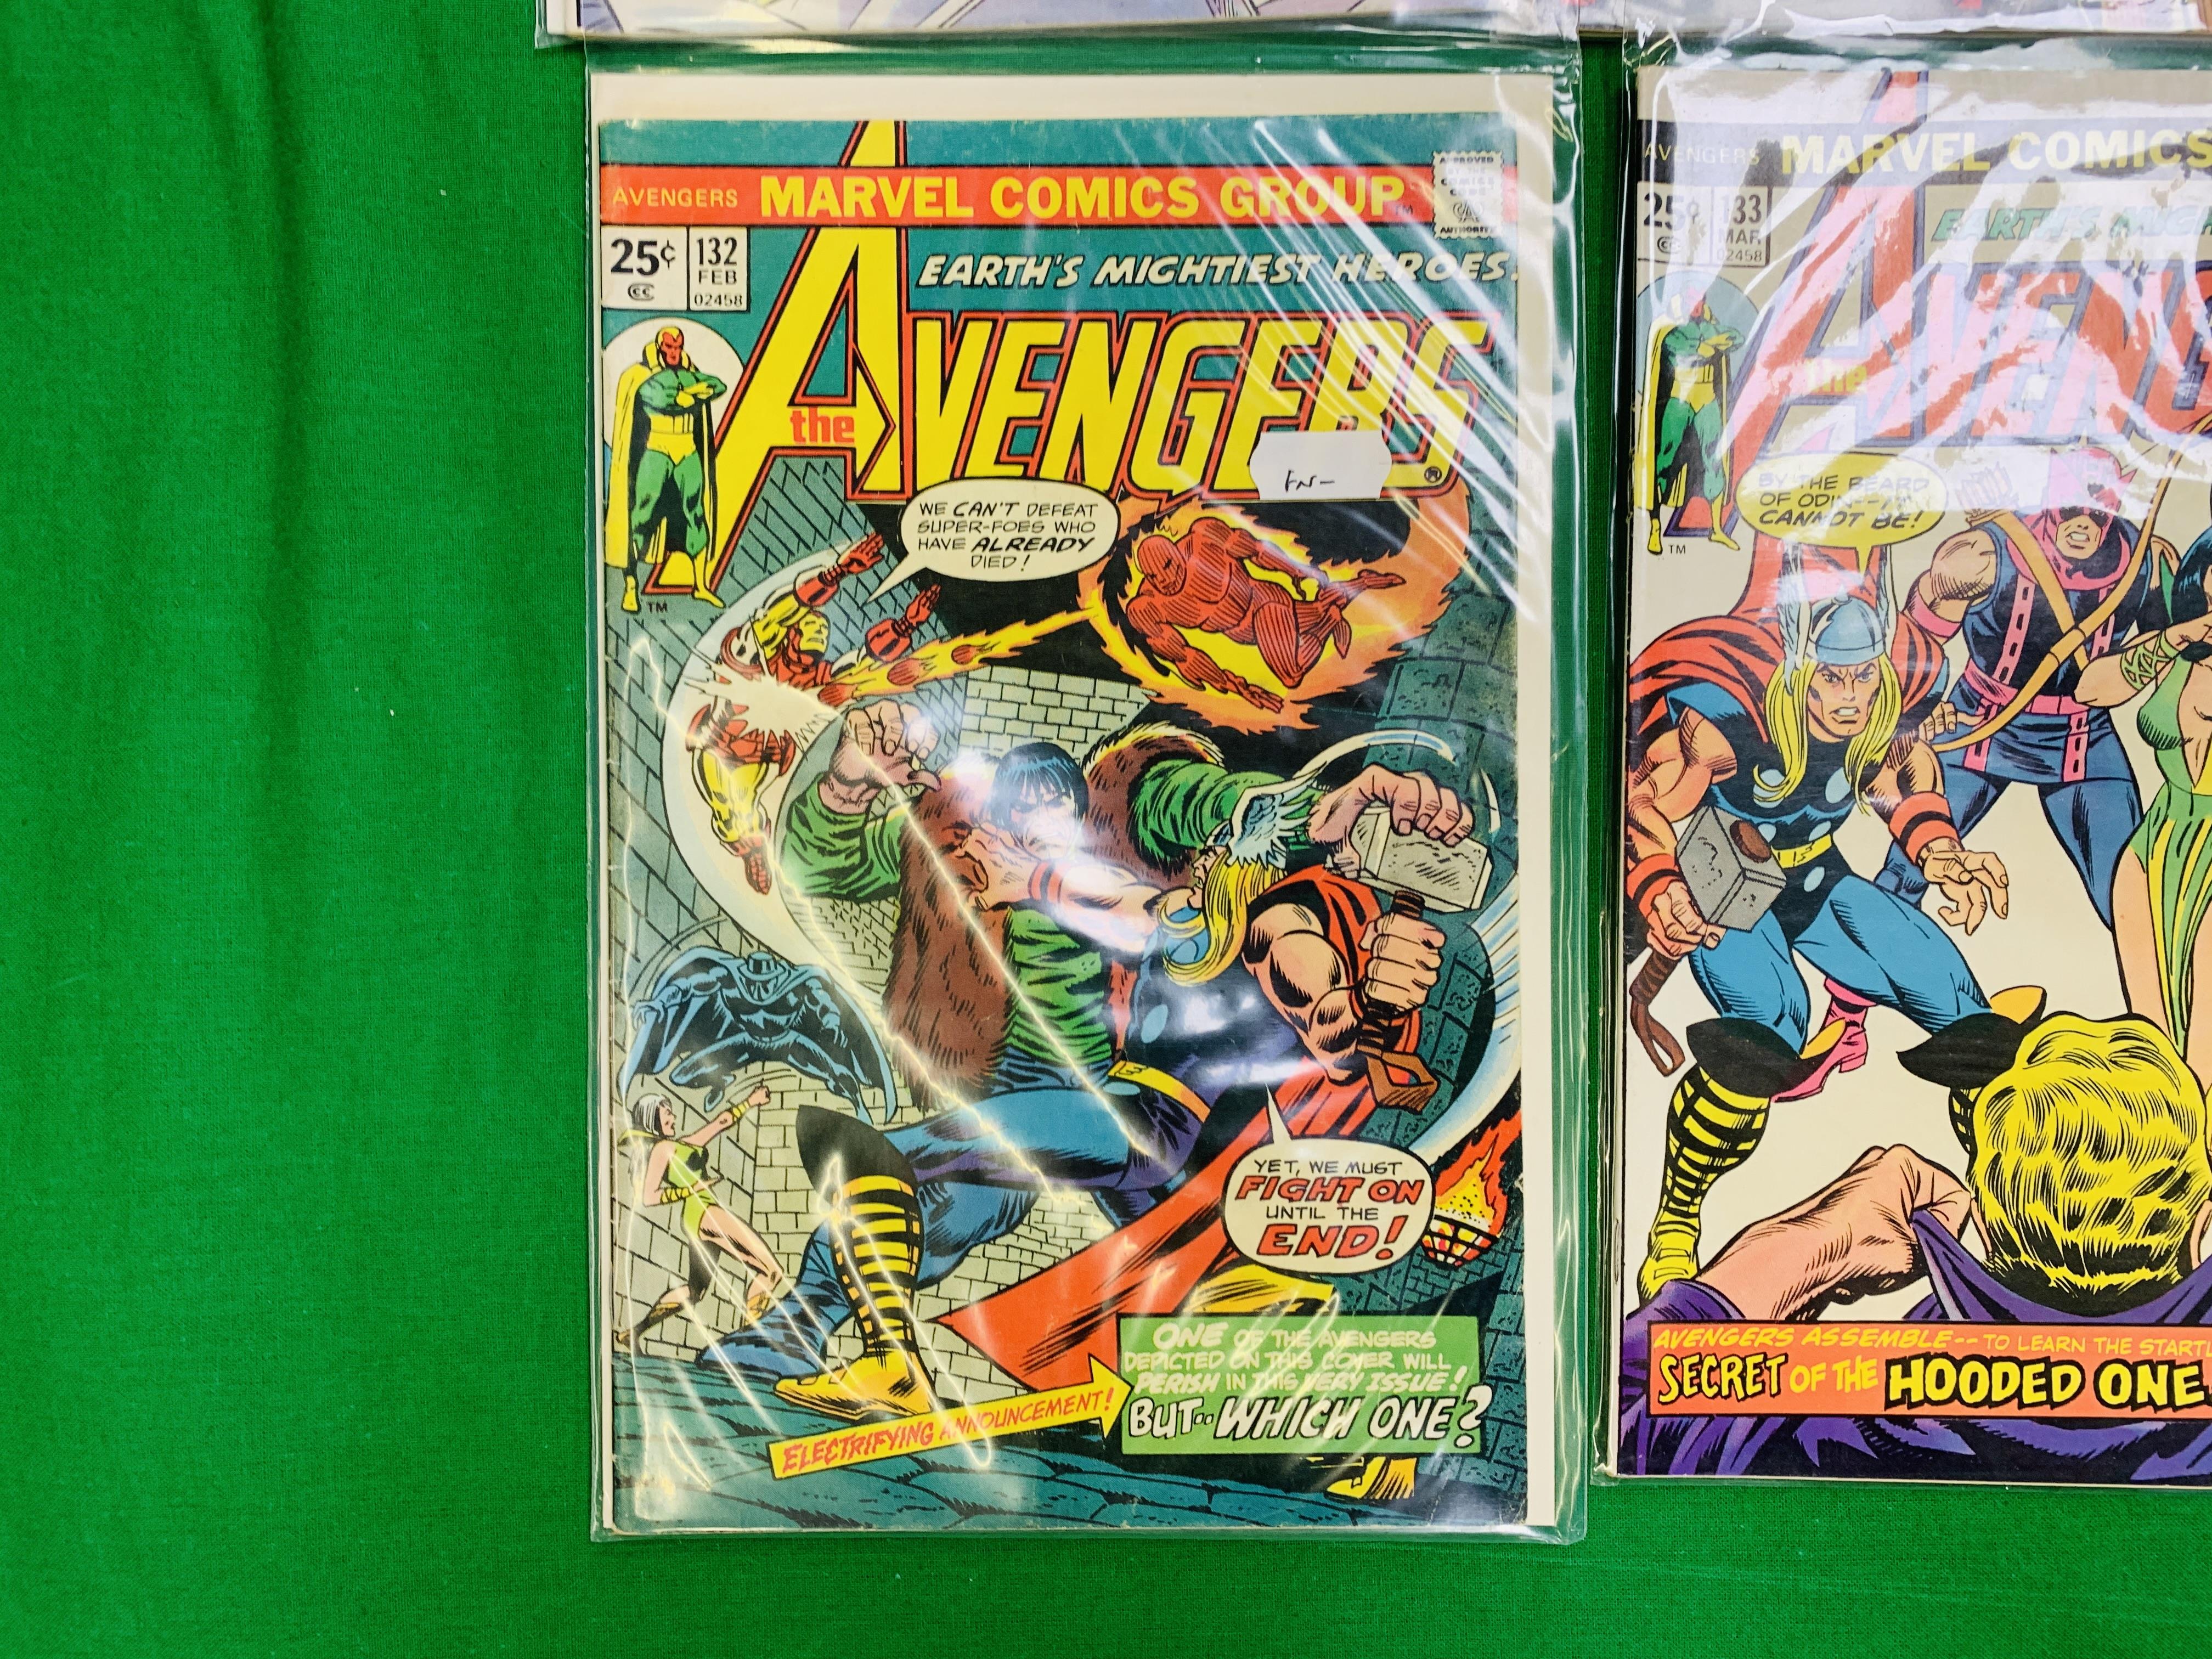 MARVEL COMICS THE AVENGERS NO. 101 - 299, MISSING ISSUES 103 AND 110. - Image 24 of 130